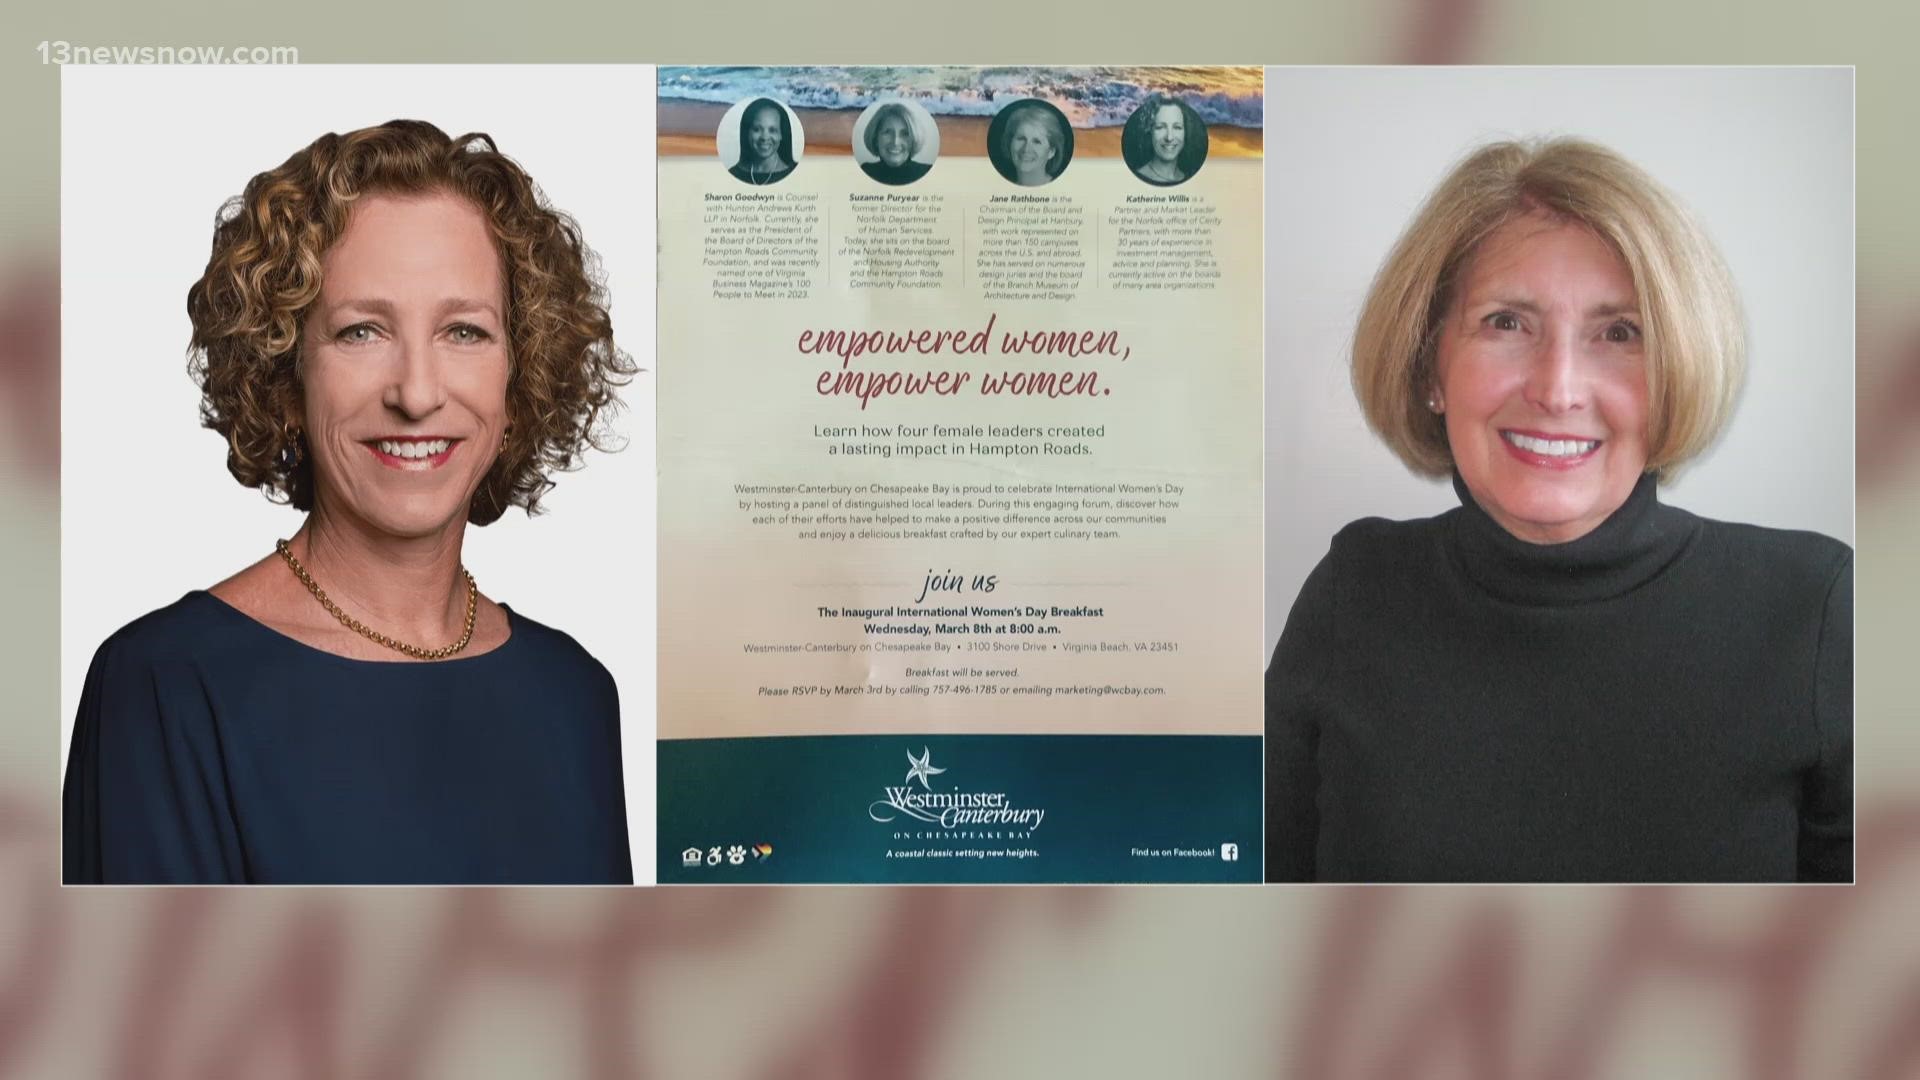 The inaugural International Women’s Day Breakfast is set to bring a panel discussion and delicious food to Virginia Beach on March 8.